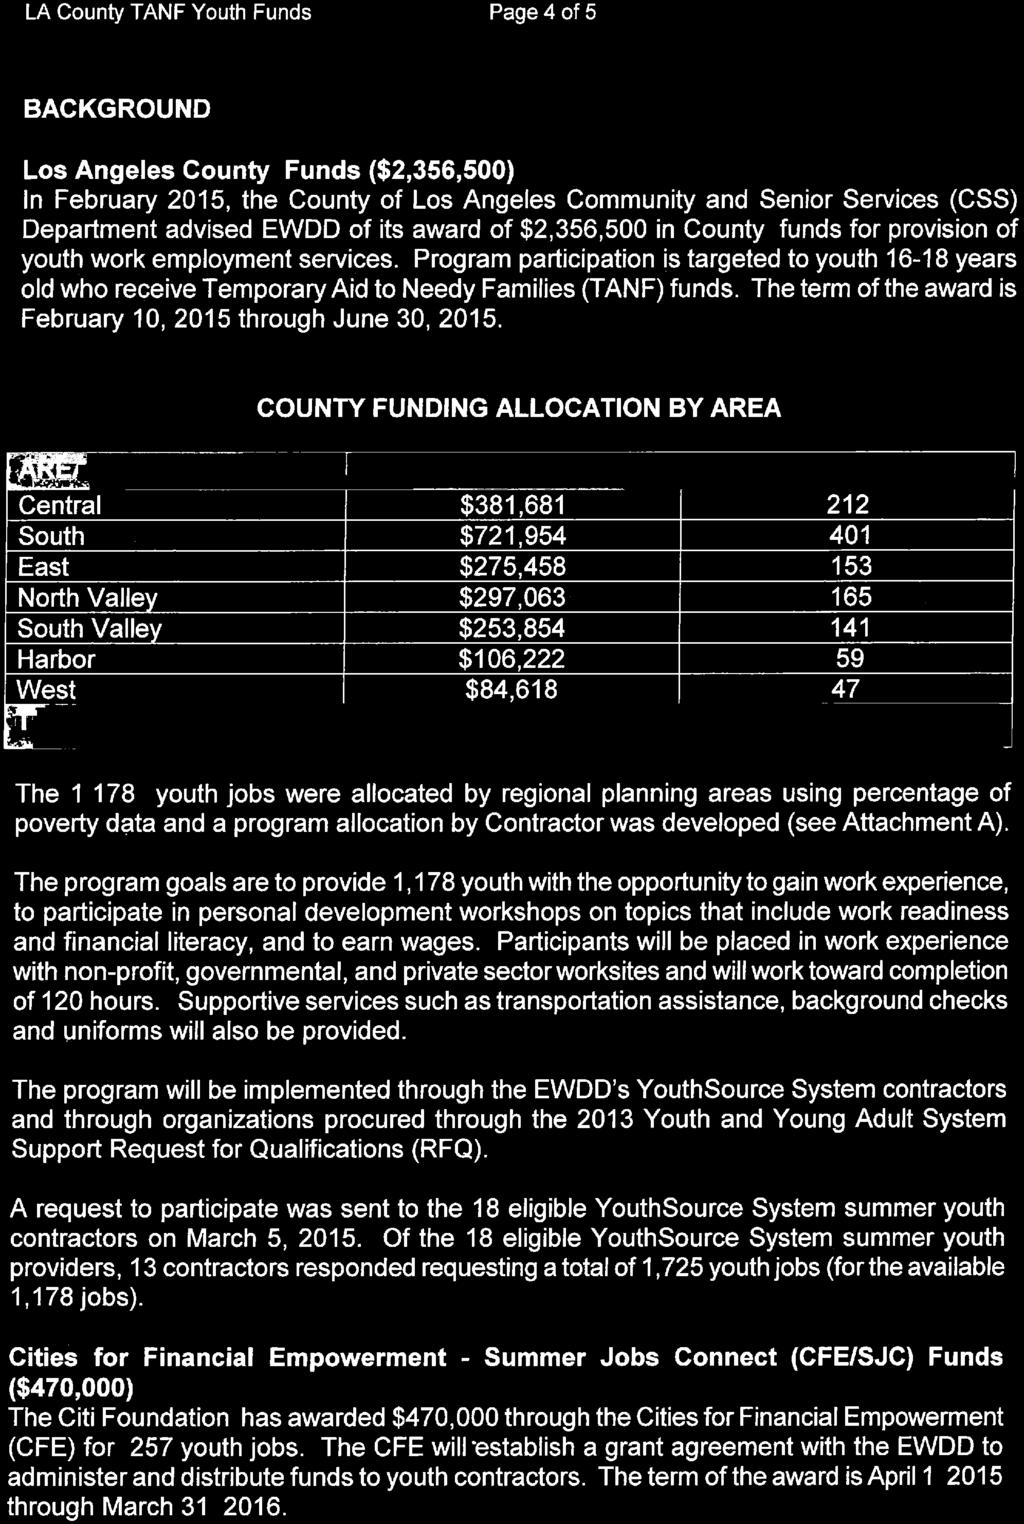 LA County TANF Youth Funds Page 4 of 5 March 31, 2015 BACKGROUND Los Angeles County Funds ($2,356,500) In February 2015, the County of Los Angeles Community and Senior Services (CSS) Department